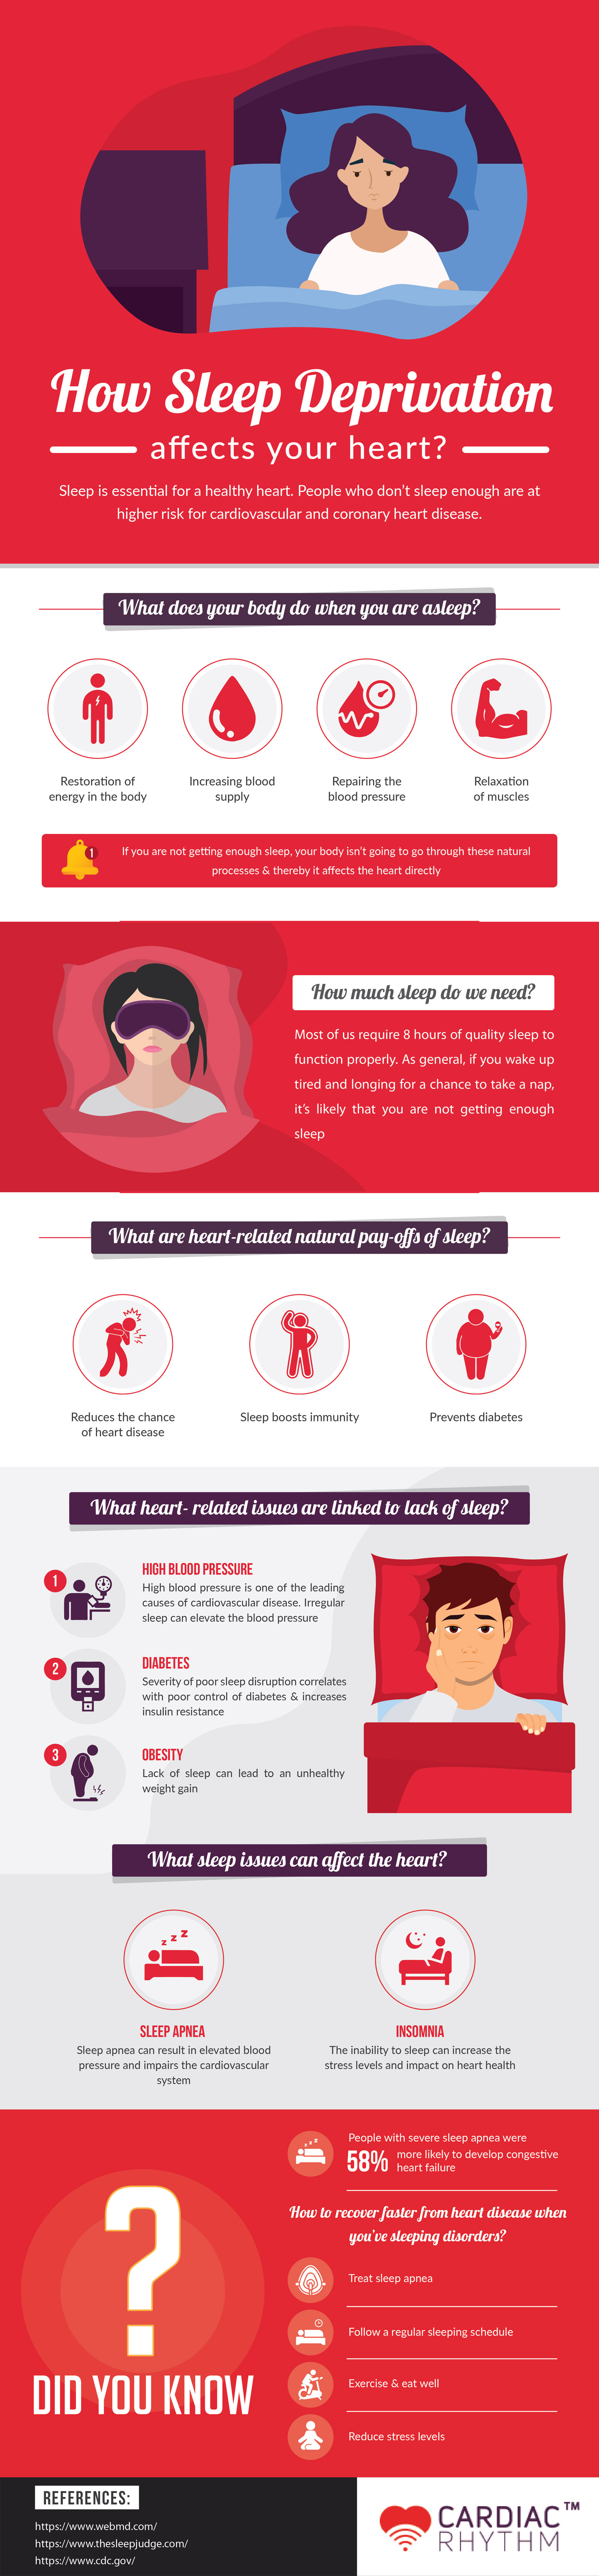 How Sleep Deprivation Affects Your Heart?